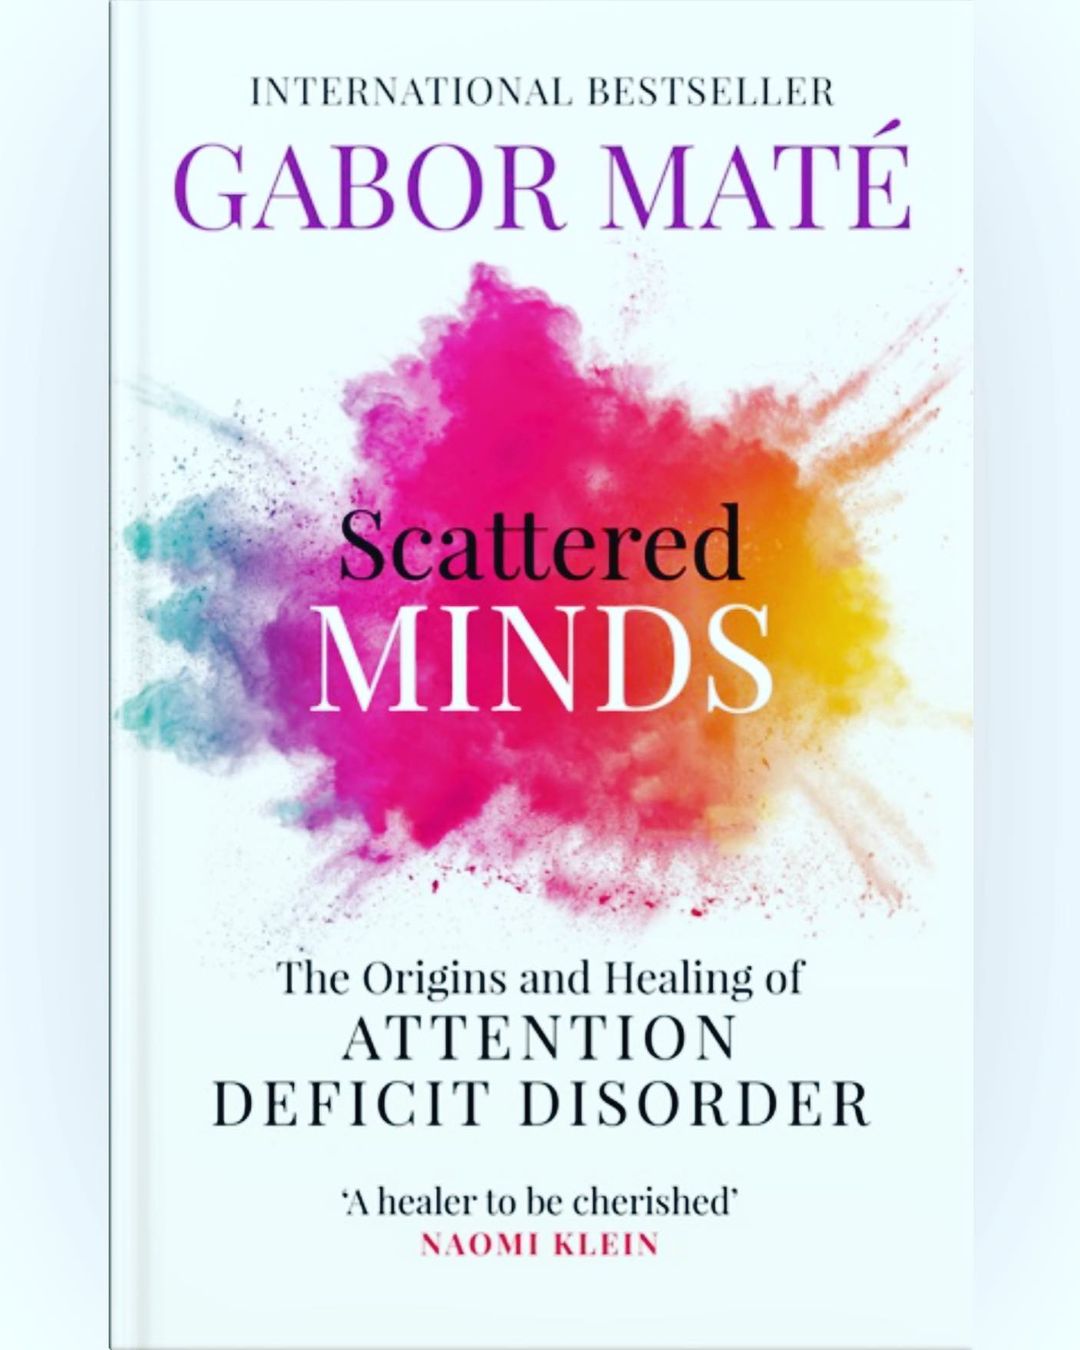 The best book I have read lately. I suspect nowadays most of us have “scattered minds” and therefore this book might help a lot of people. Highly recommend. I’ve bought it on my phone in a reading version in English, an audio version and I’m now buying it in Russian for some of my family members. #adhd #gabormate #scatteredminds #рассеянныеумы @gabormatemd